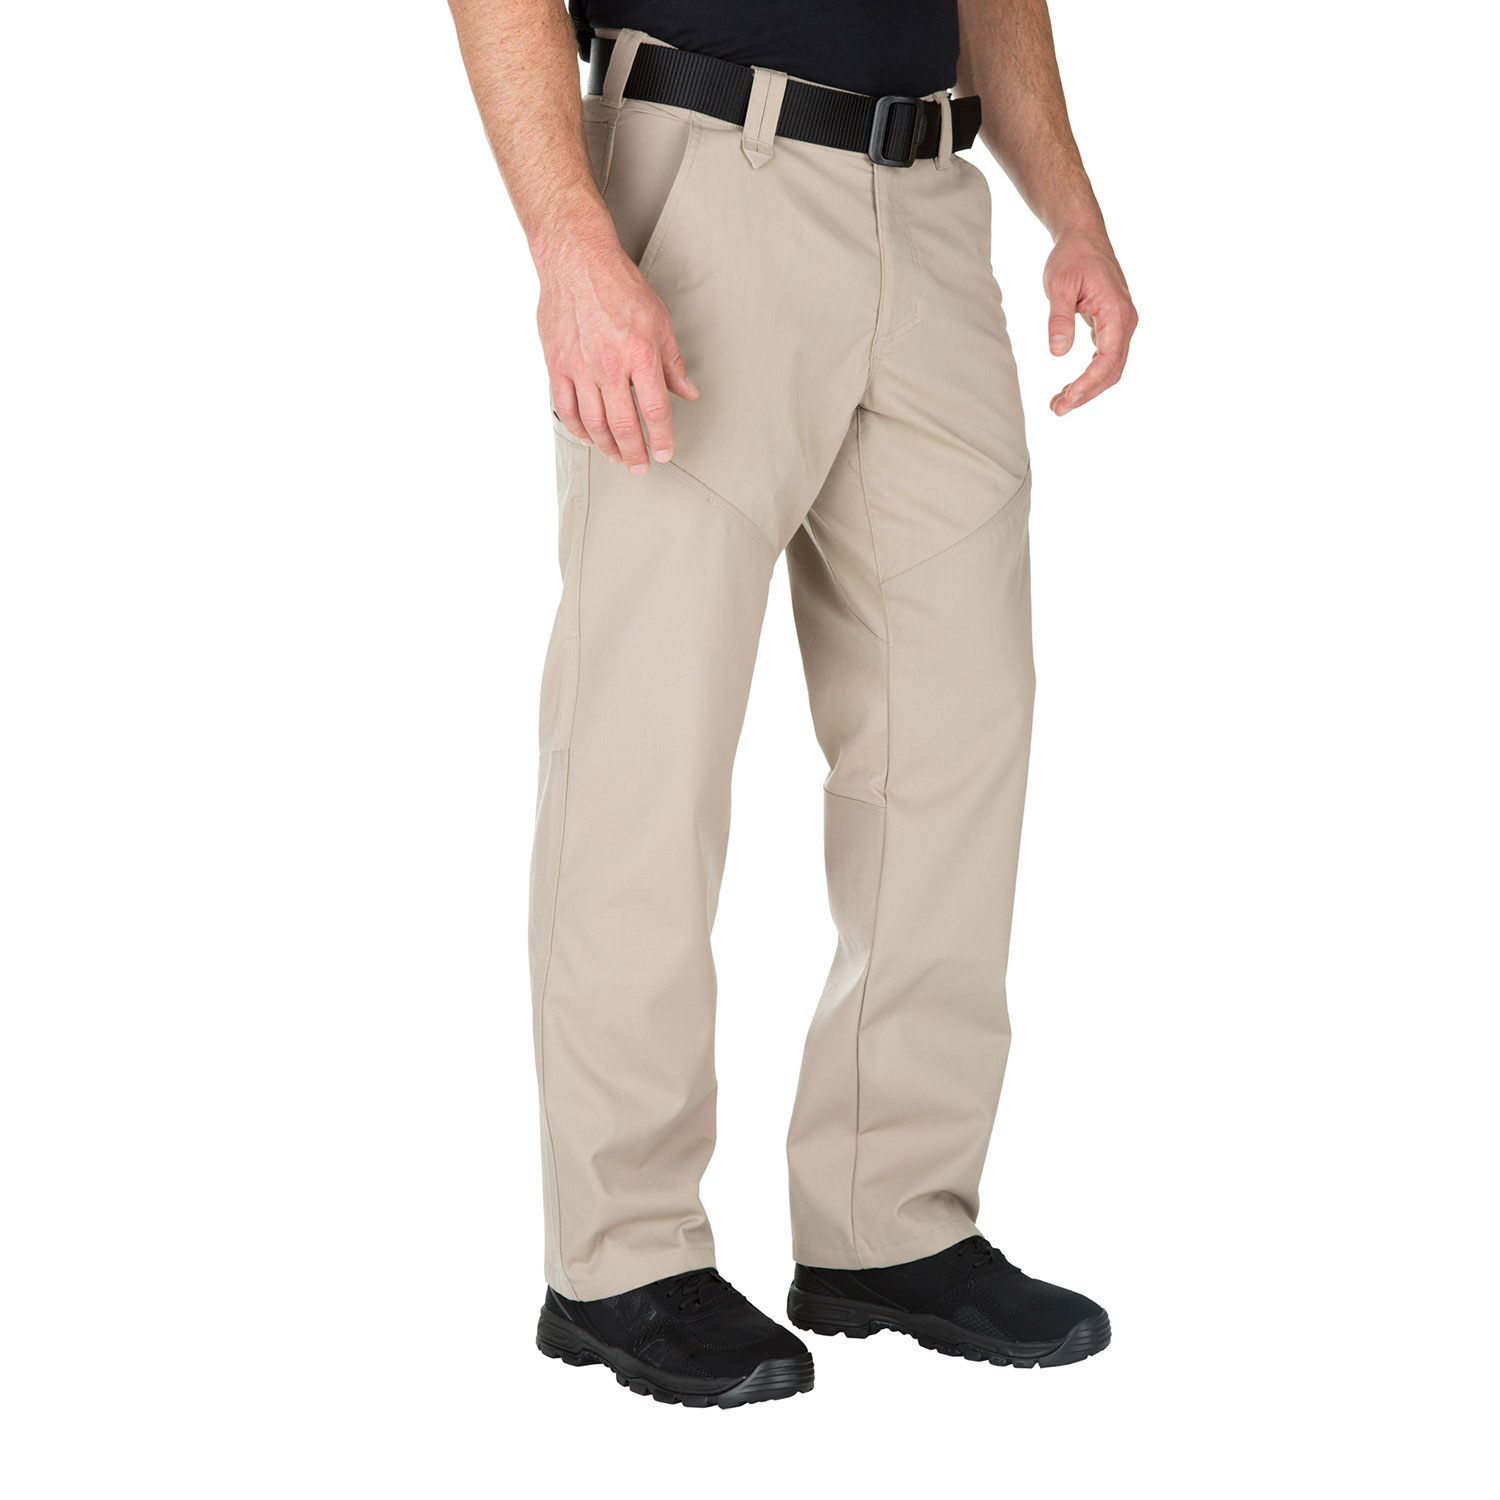 5.11 Stonecutter Pant